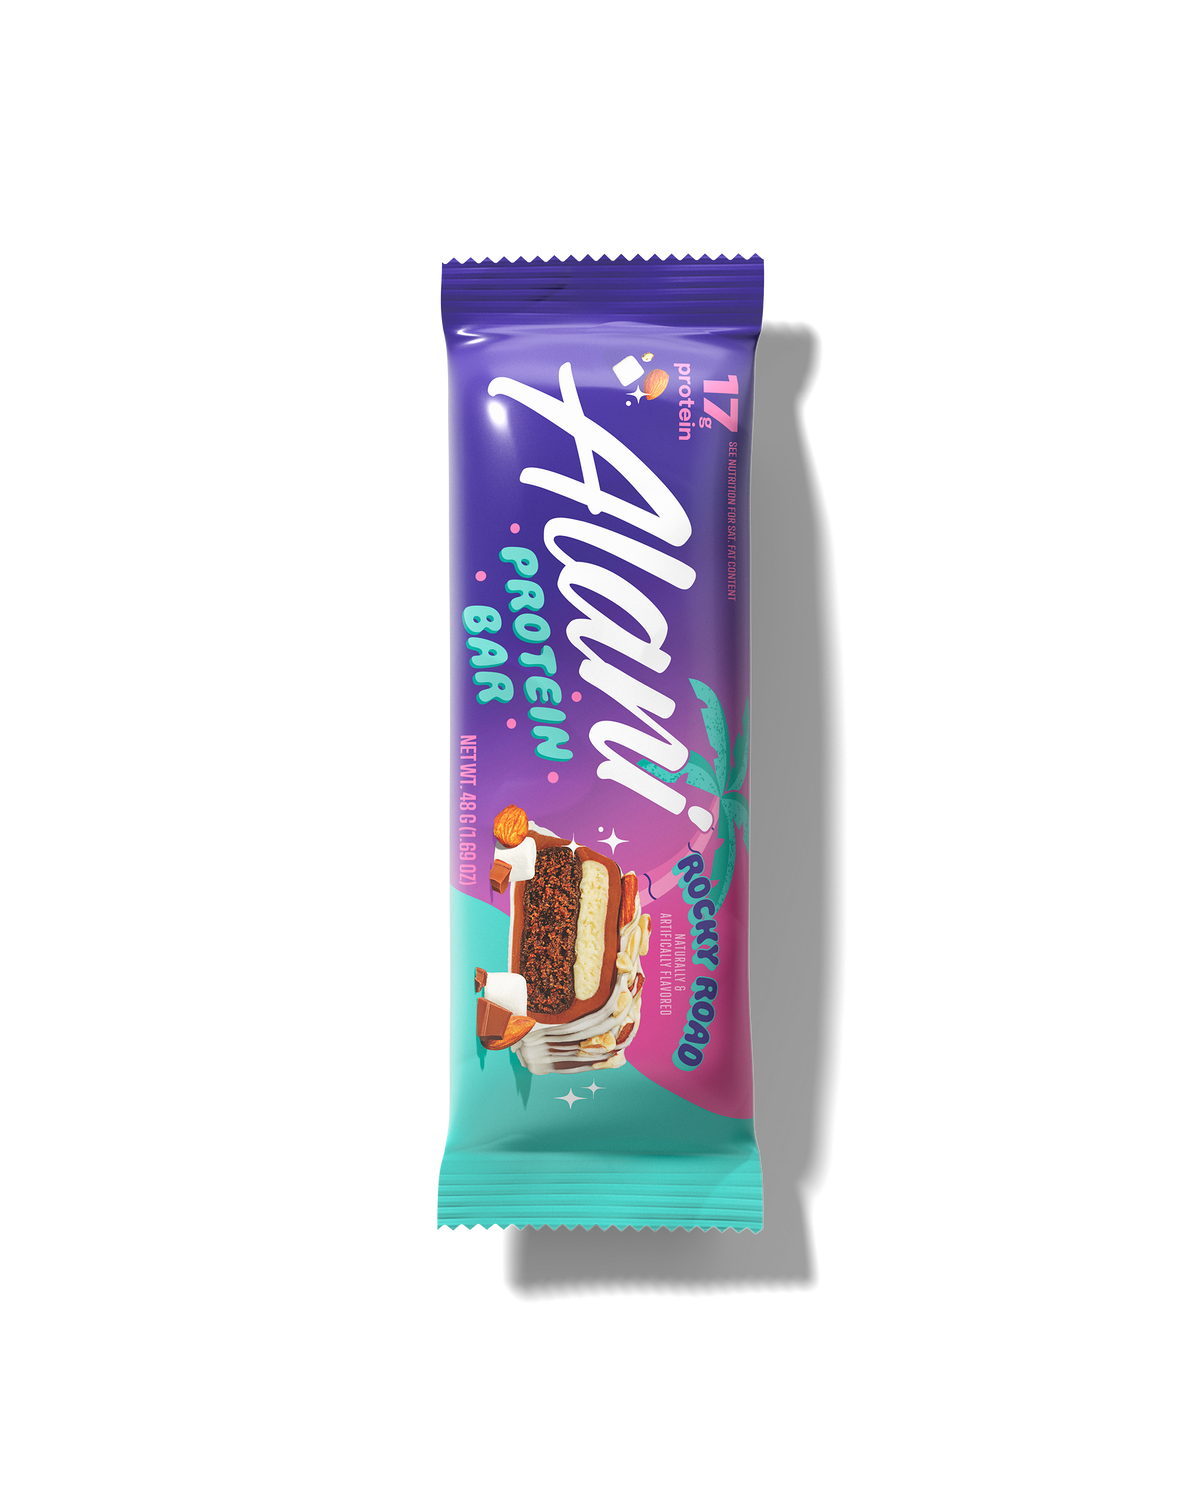 Alani Nu Rocky Road Protein Bar 12-Pack